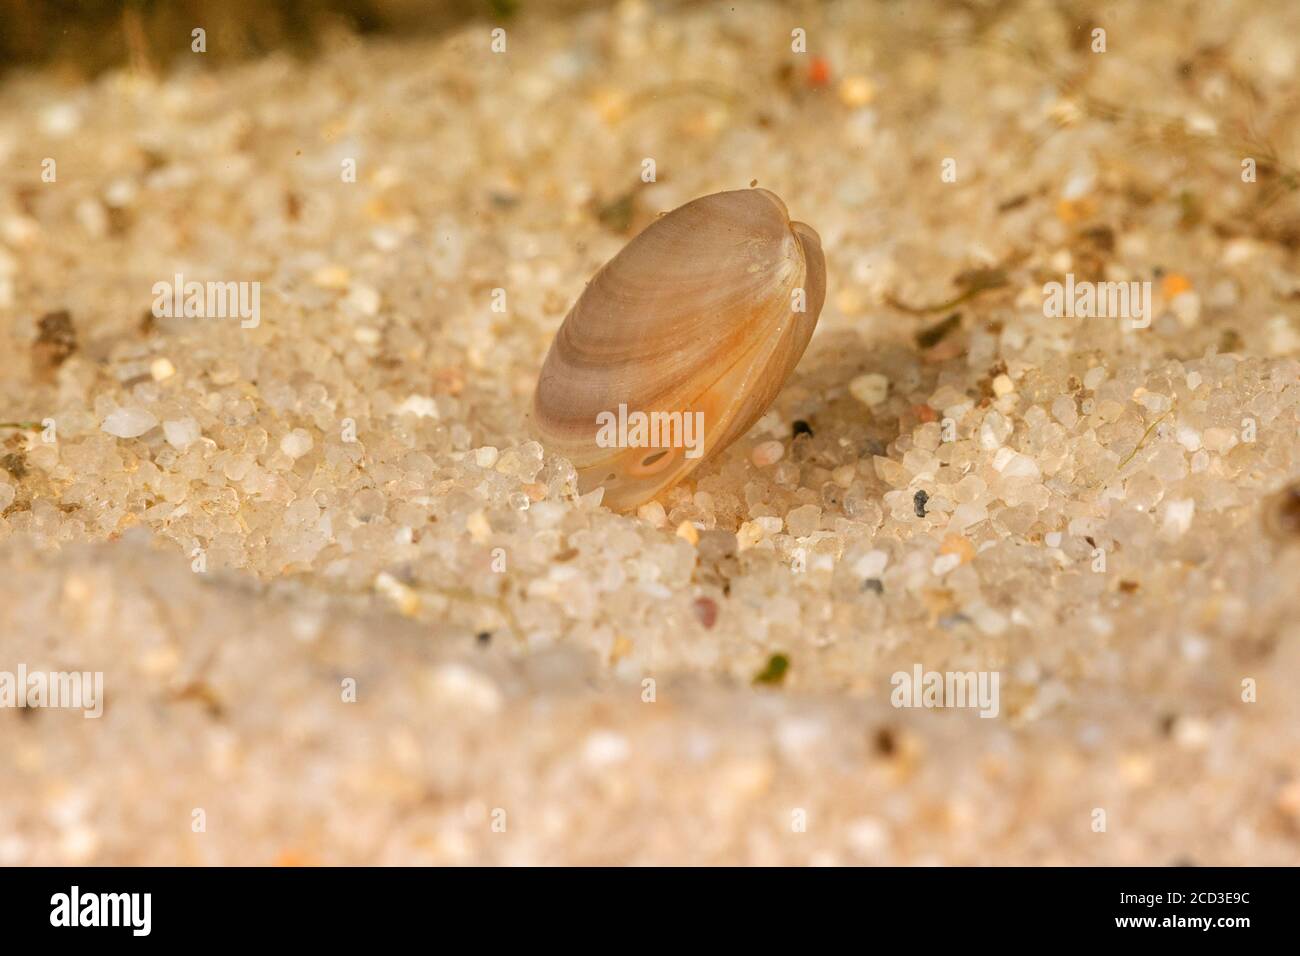 lake orb mussel, lake fingernailclam, capped orb mussel (Musculium lacustre, Sphaerium lacustre), digging into the ground Stock Photo